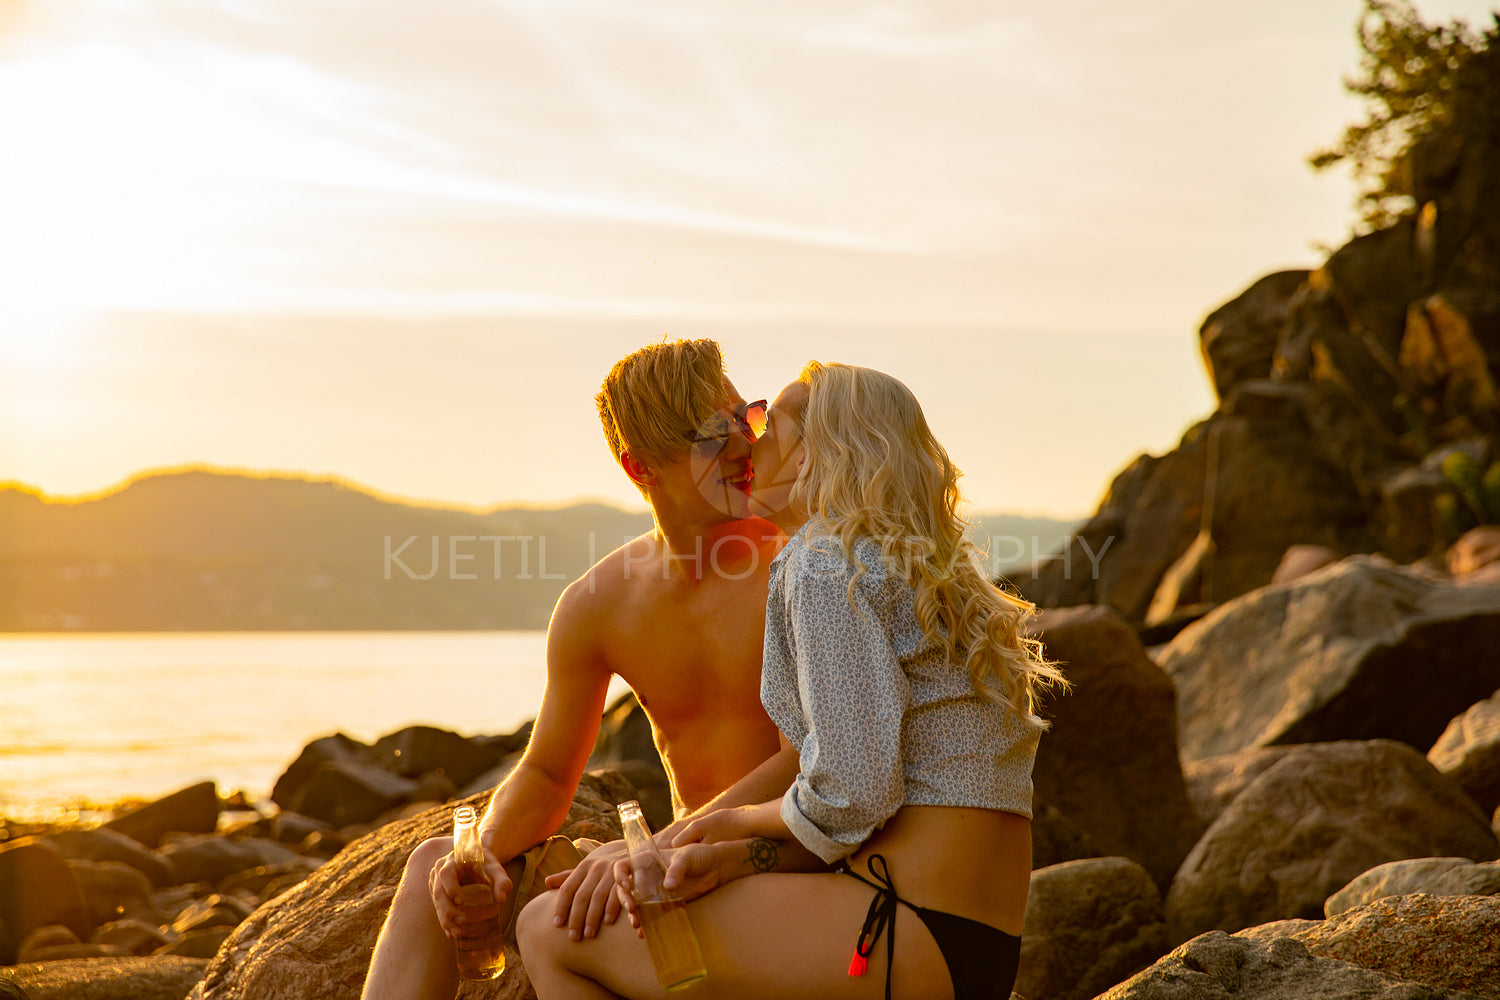 Close-up of Romantic Couple Kissing And Drinking Beer While Sitting On Rocks